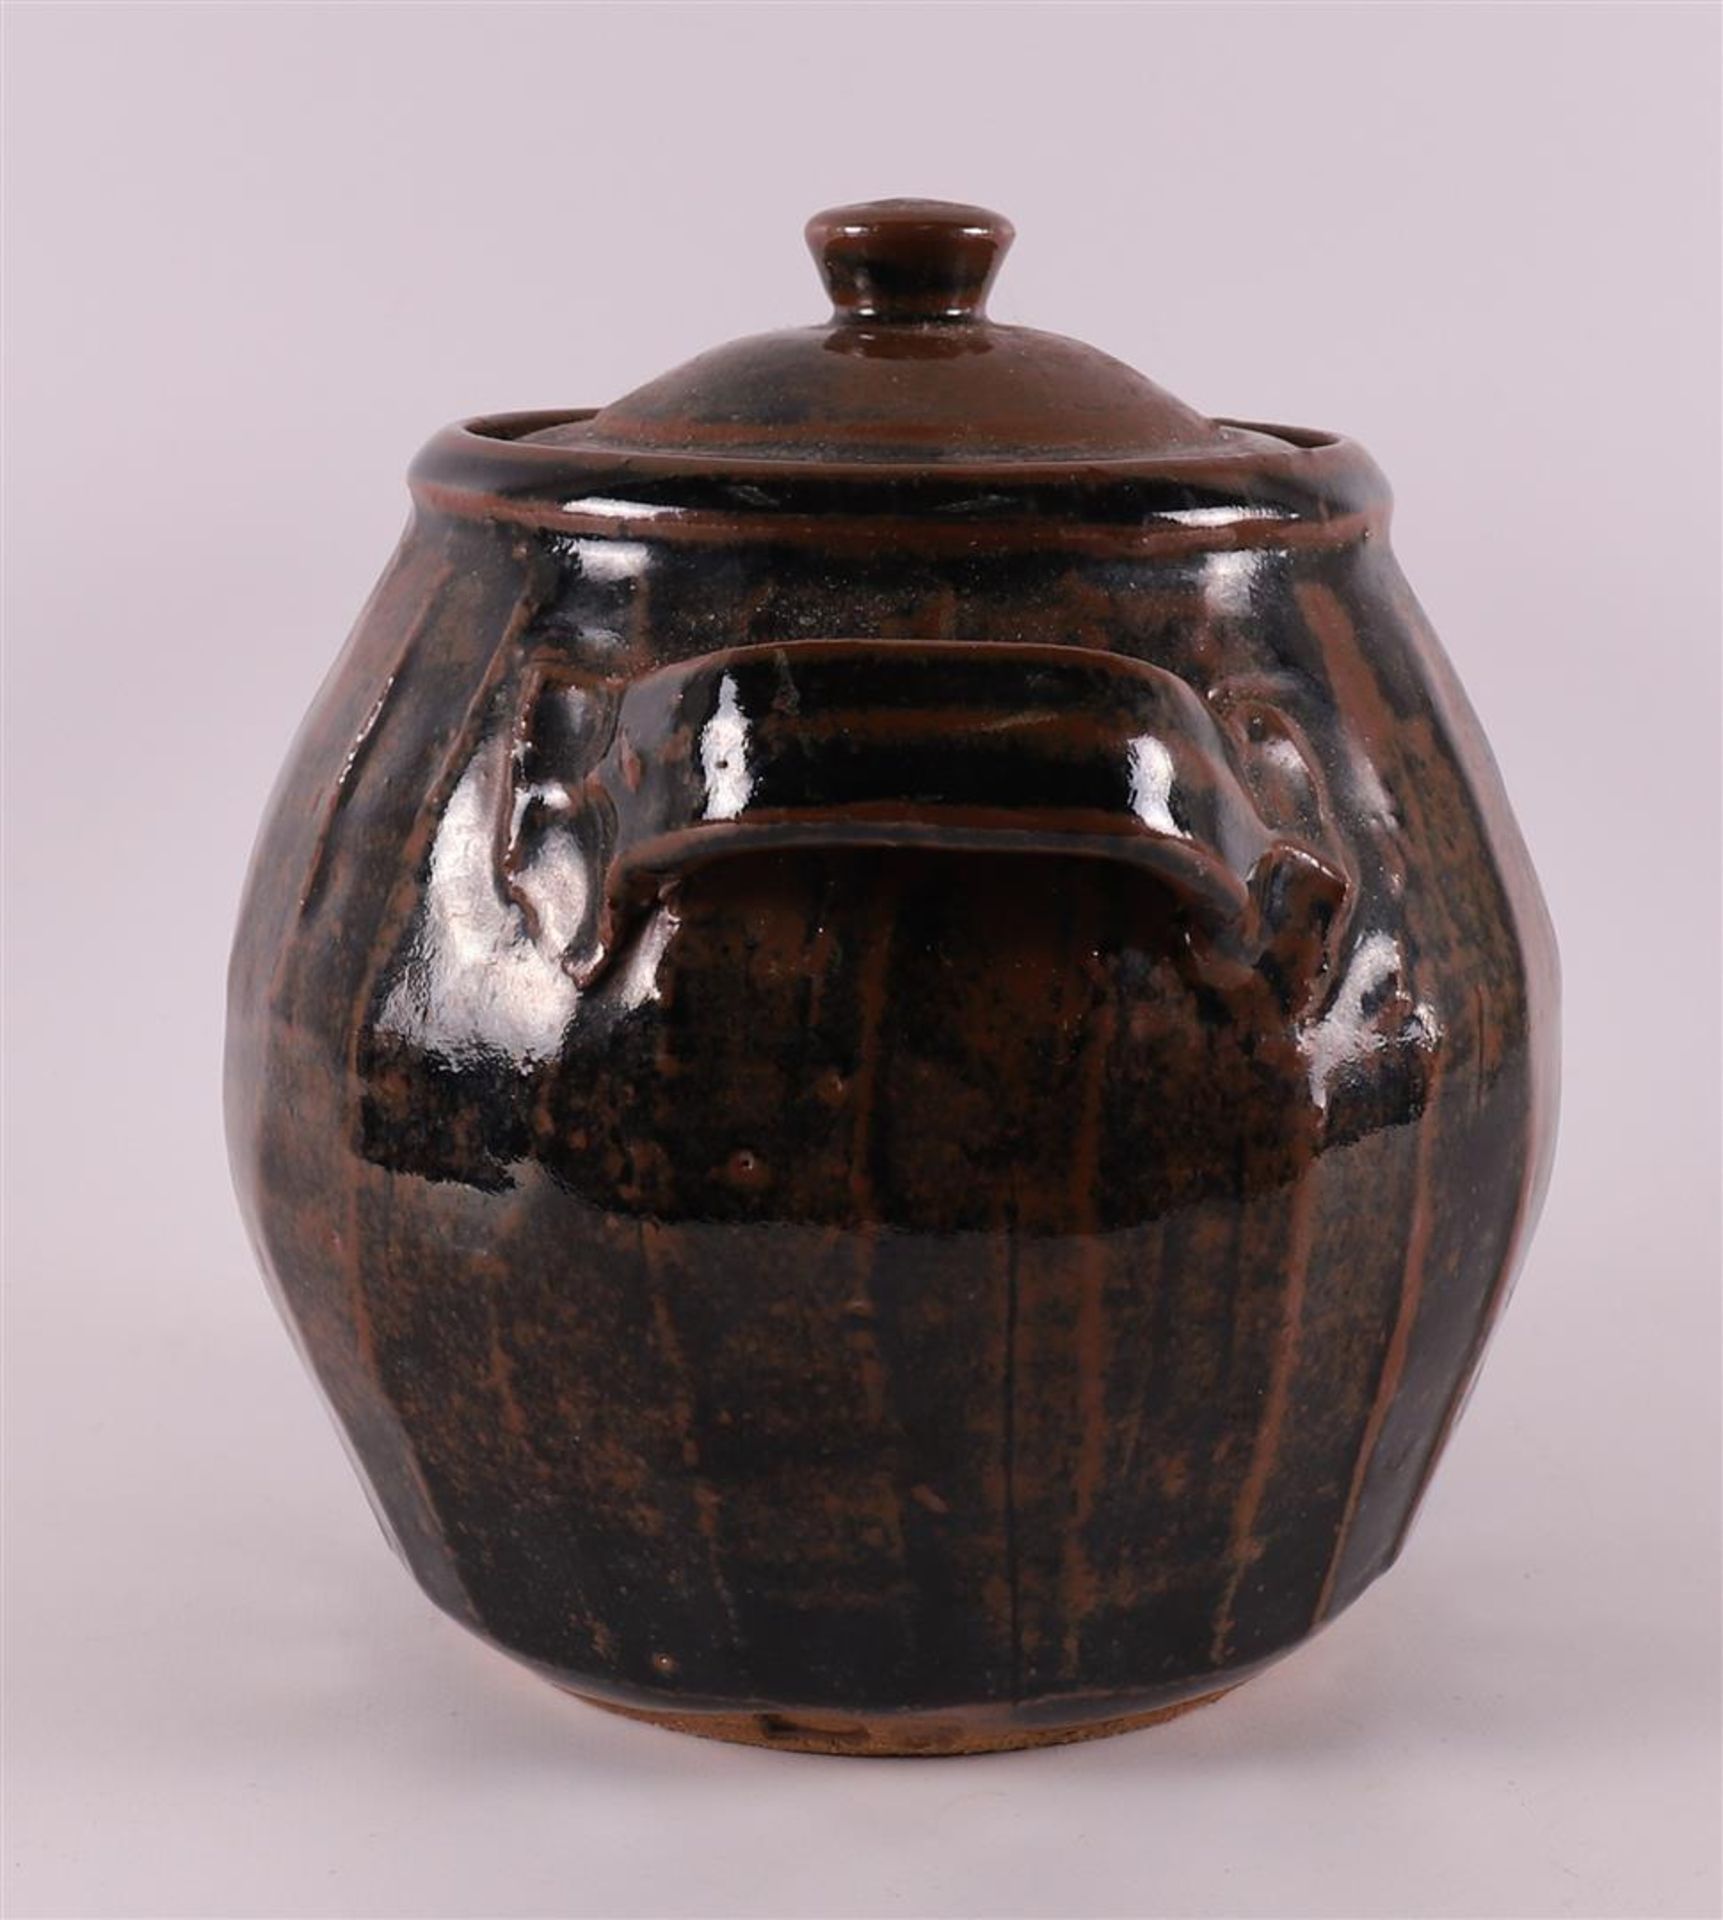 A brown glazed ceramic teapot, 2nd half of the 20th century. - Image 3 of 8